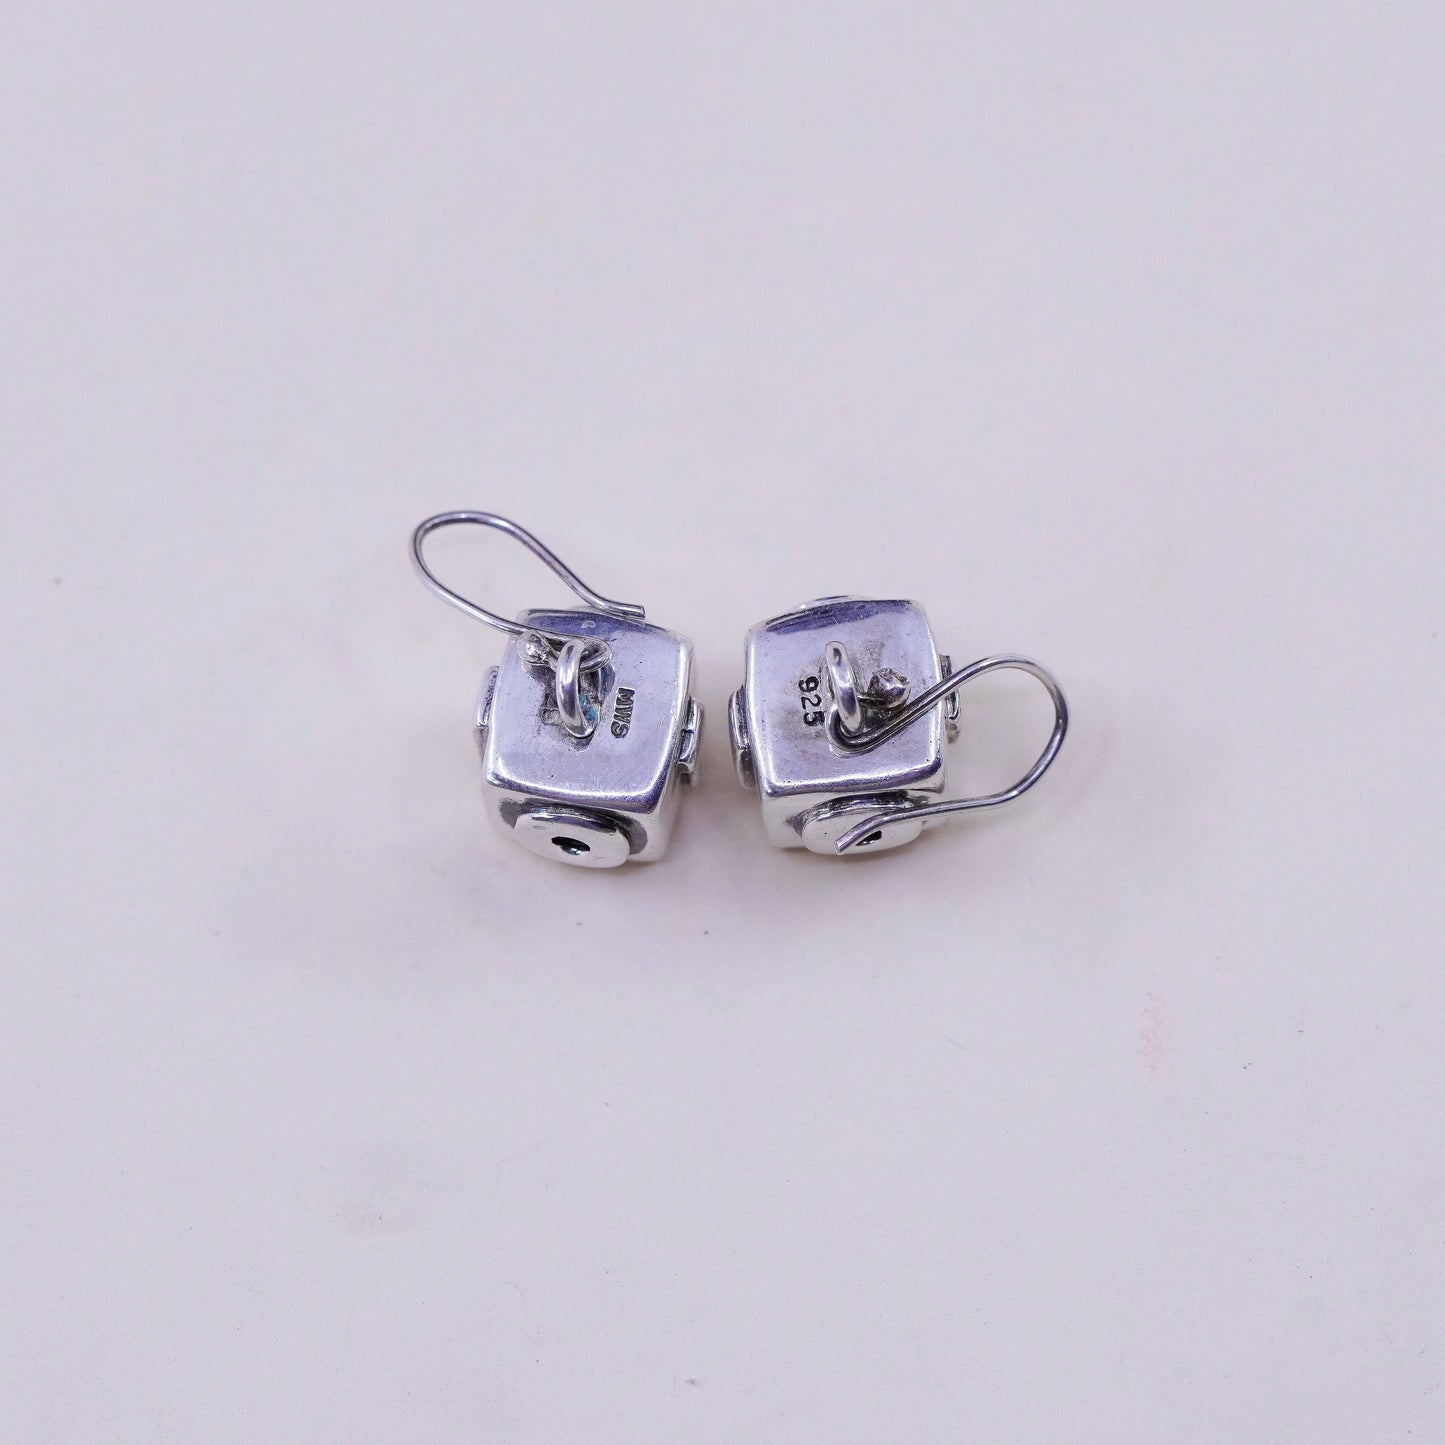 Vintage Sterling 925 silver handmade earrings, cube dangle with 0101 relief